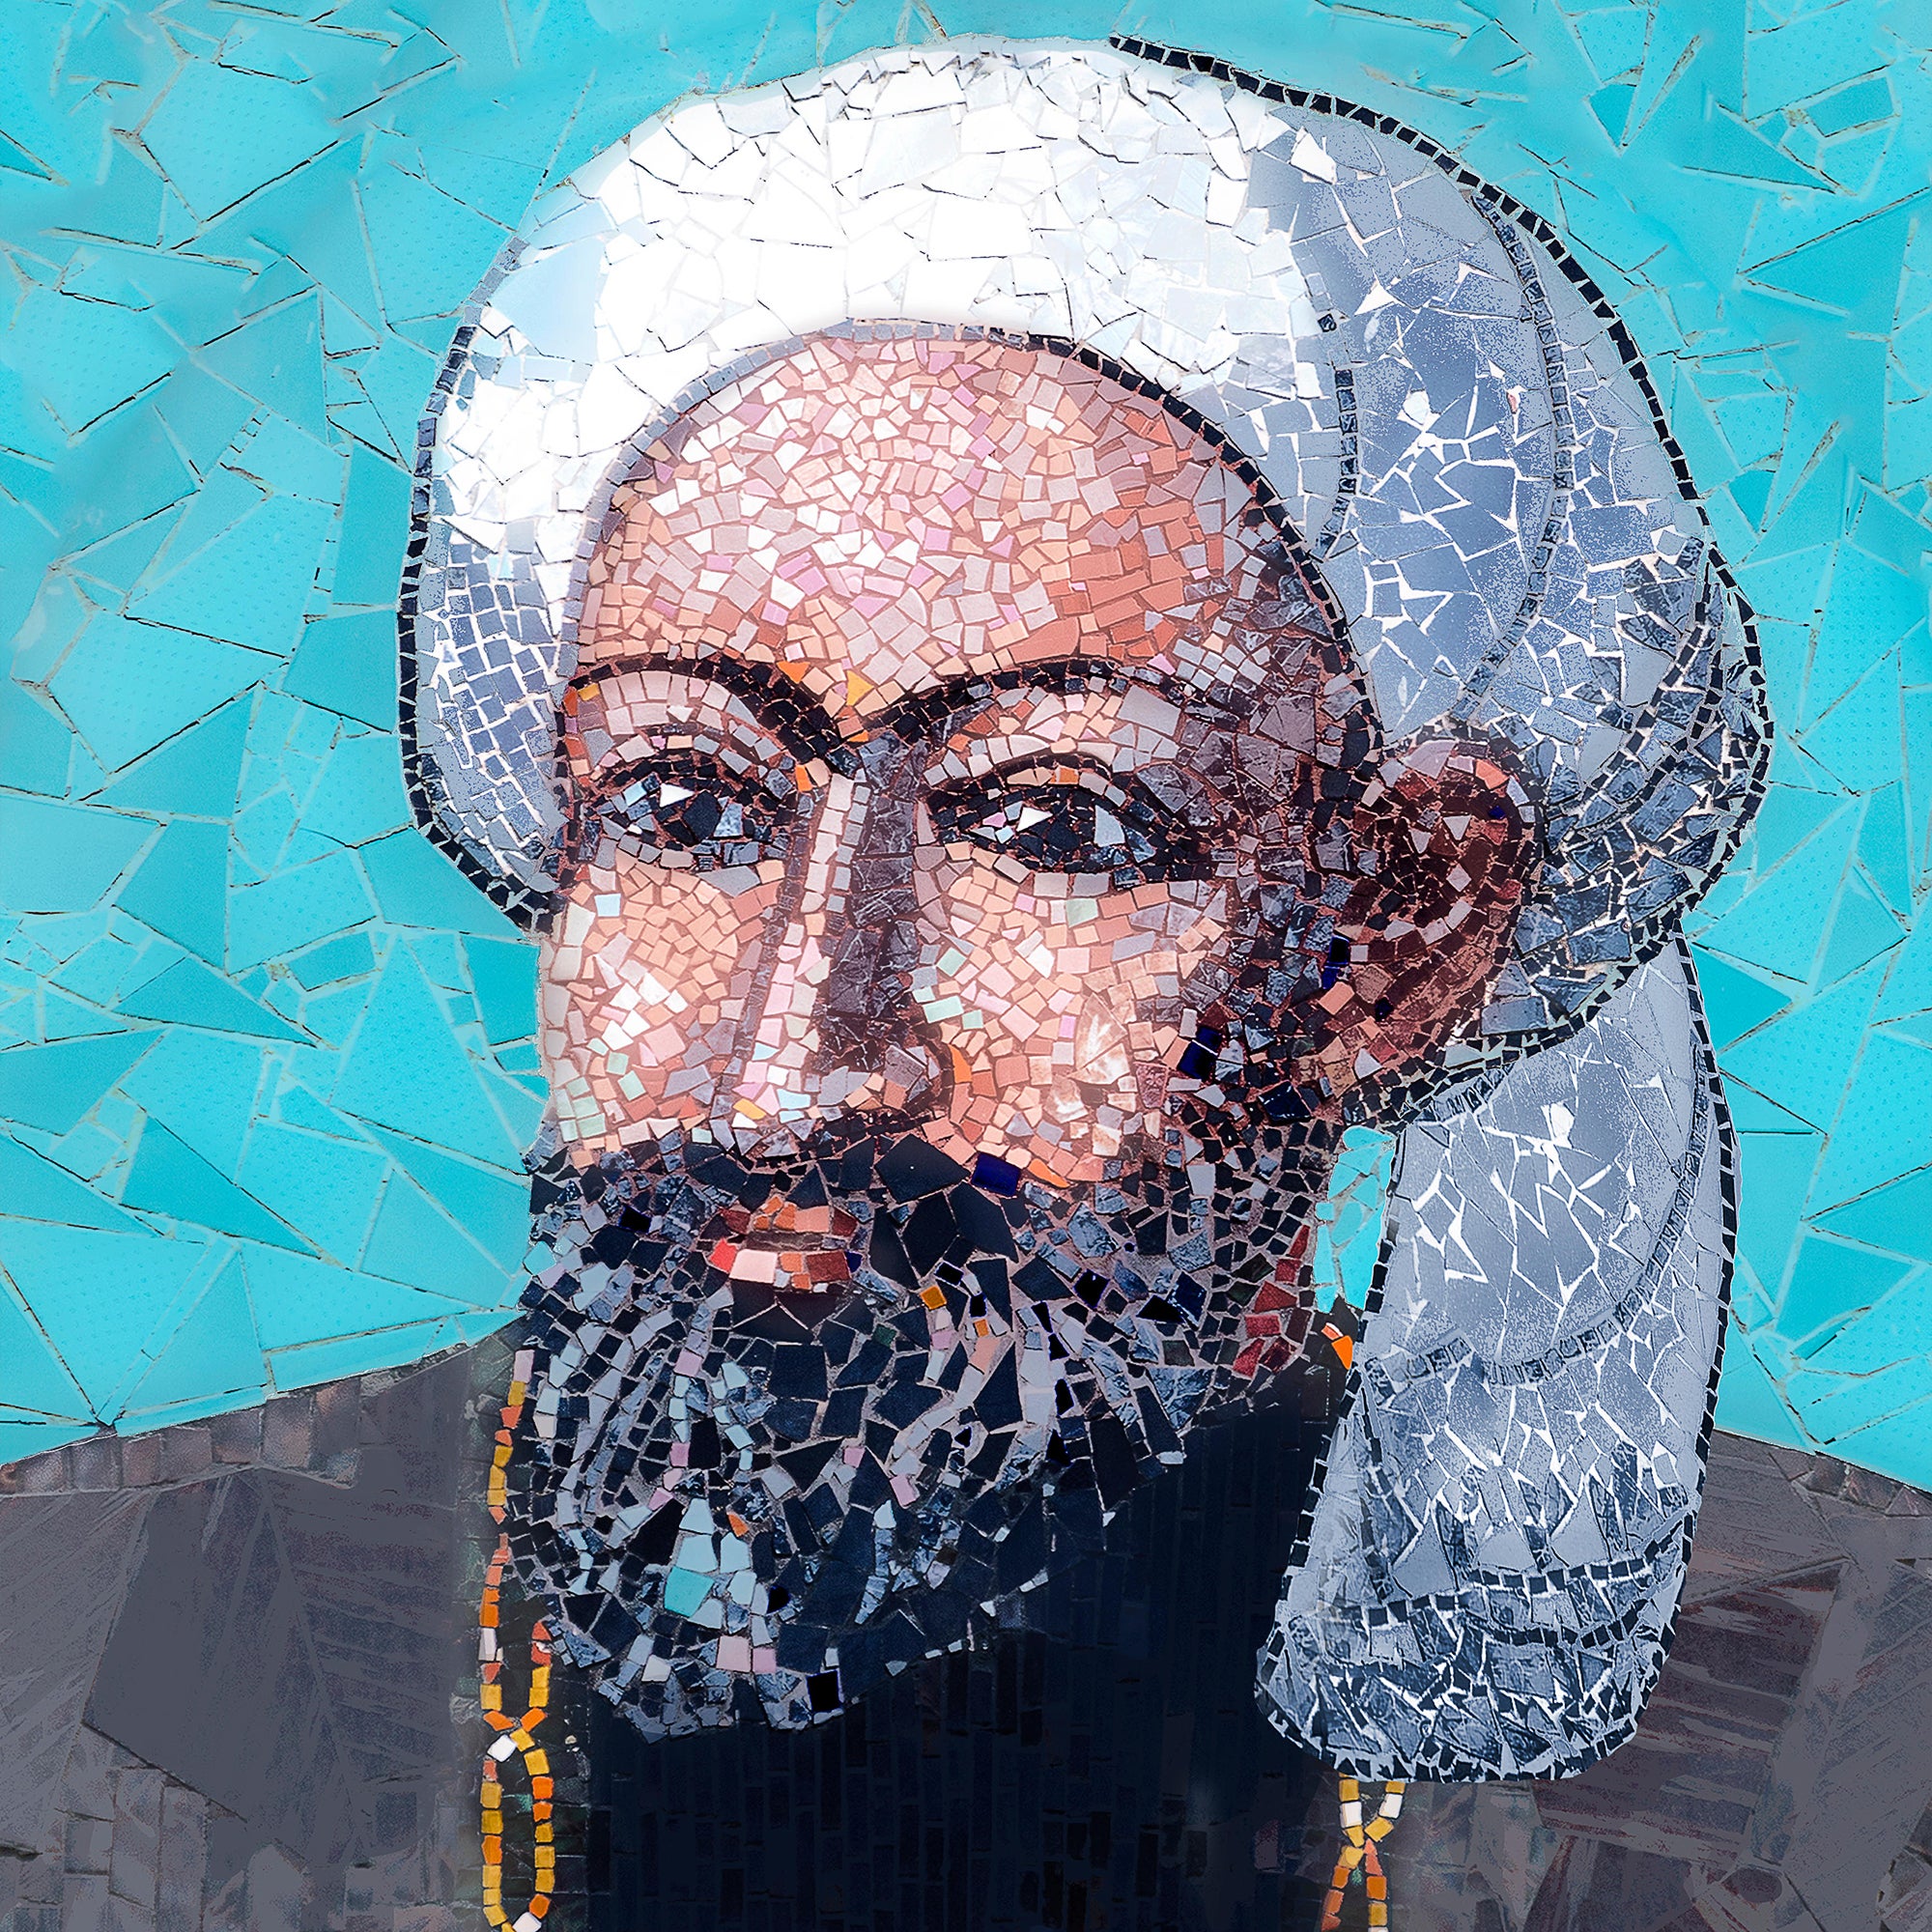 A mosaic tile portrait of Ibn Sina on a blue background